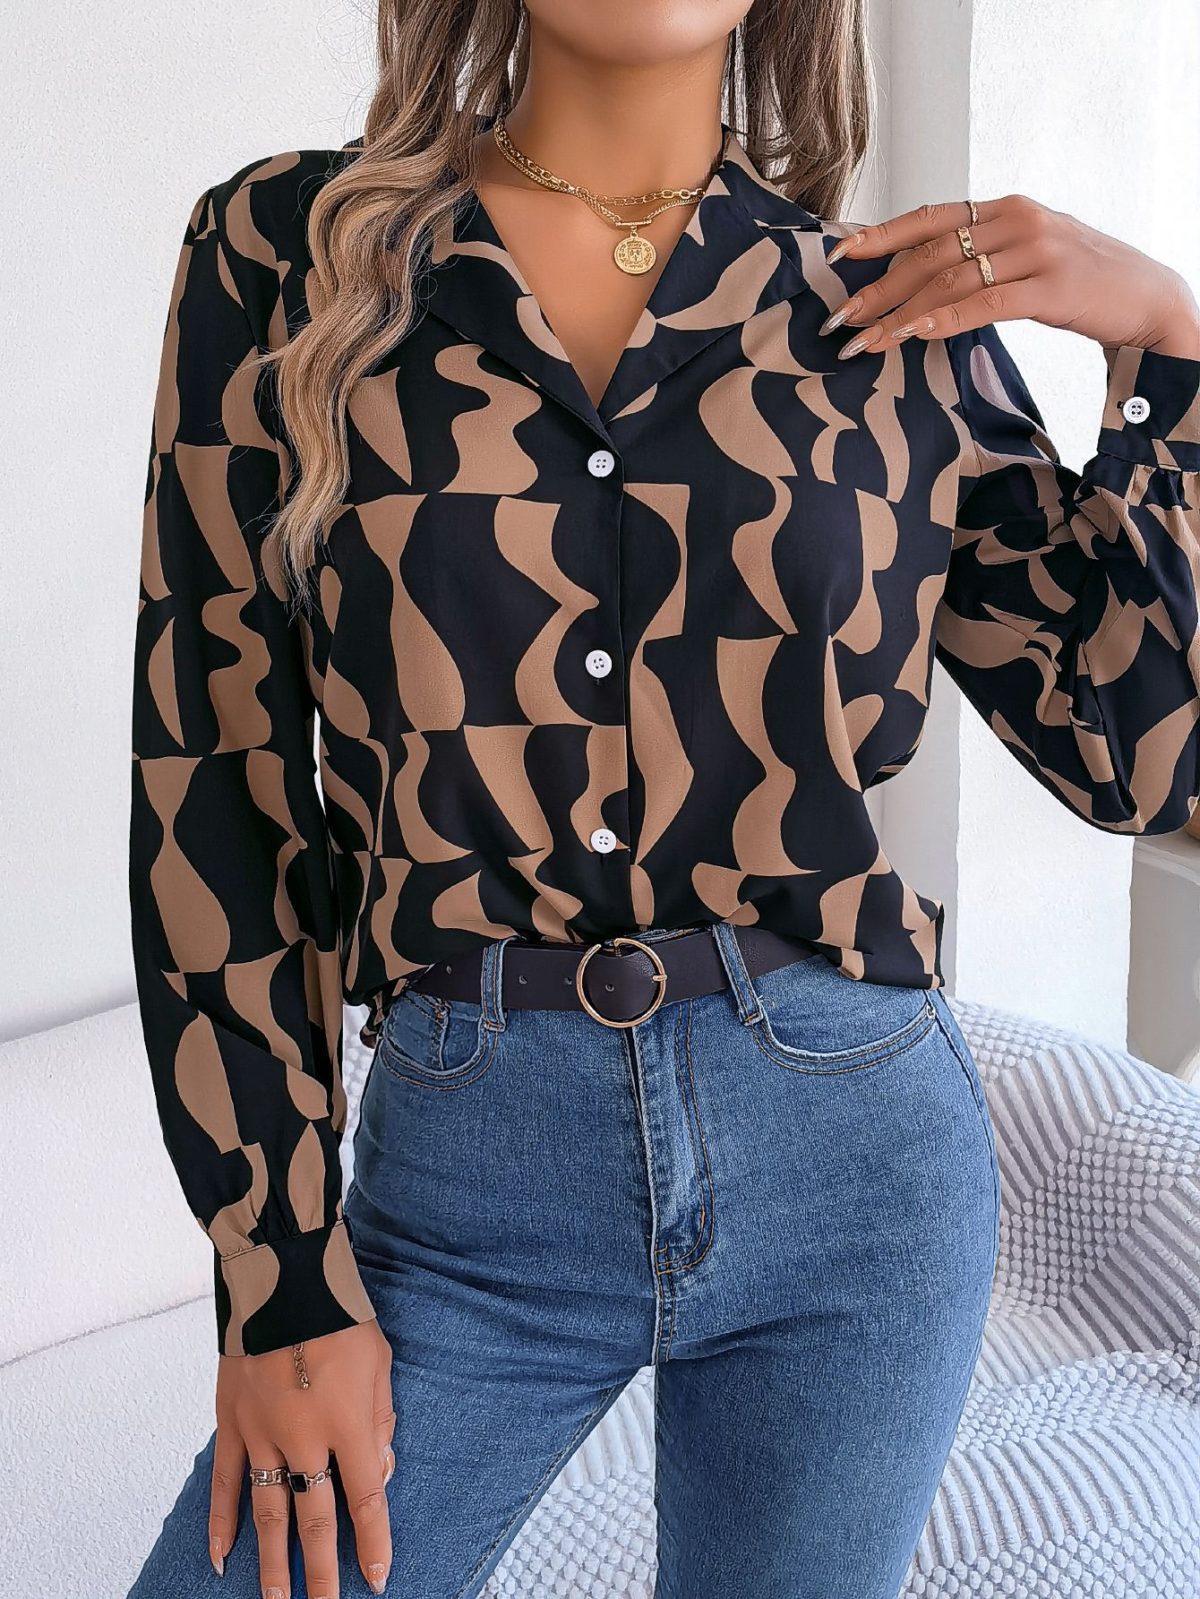 Commuting Elegant Contrast Color Striped Collar Long Sleeve Shirt in Blouses & Shirts